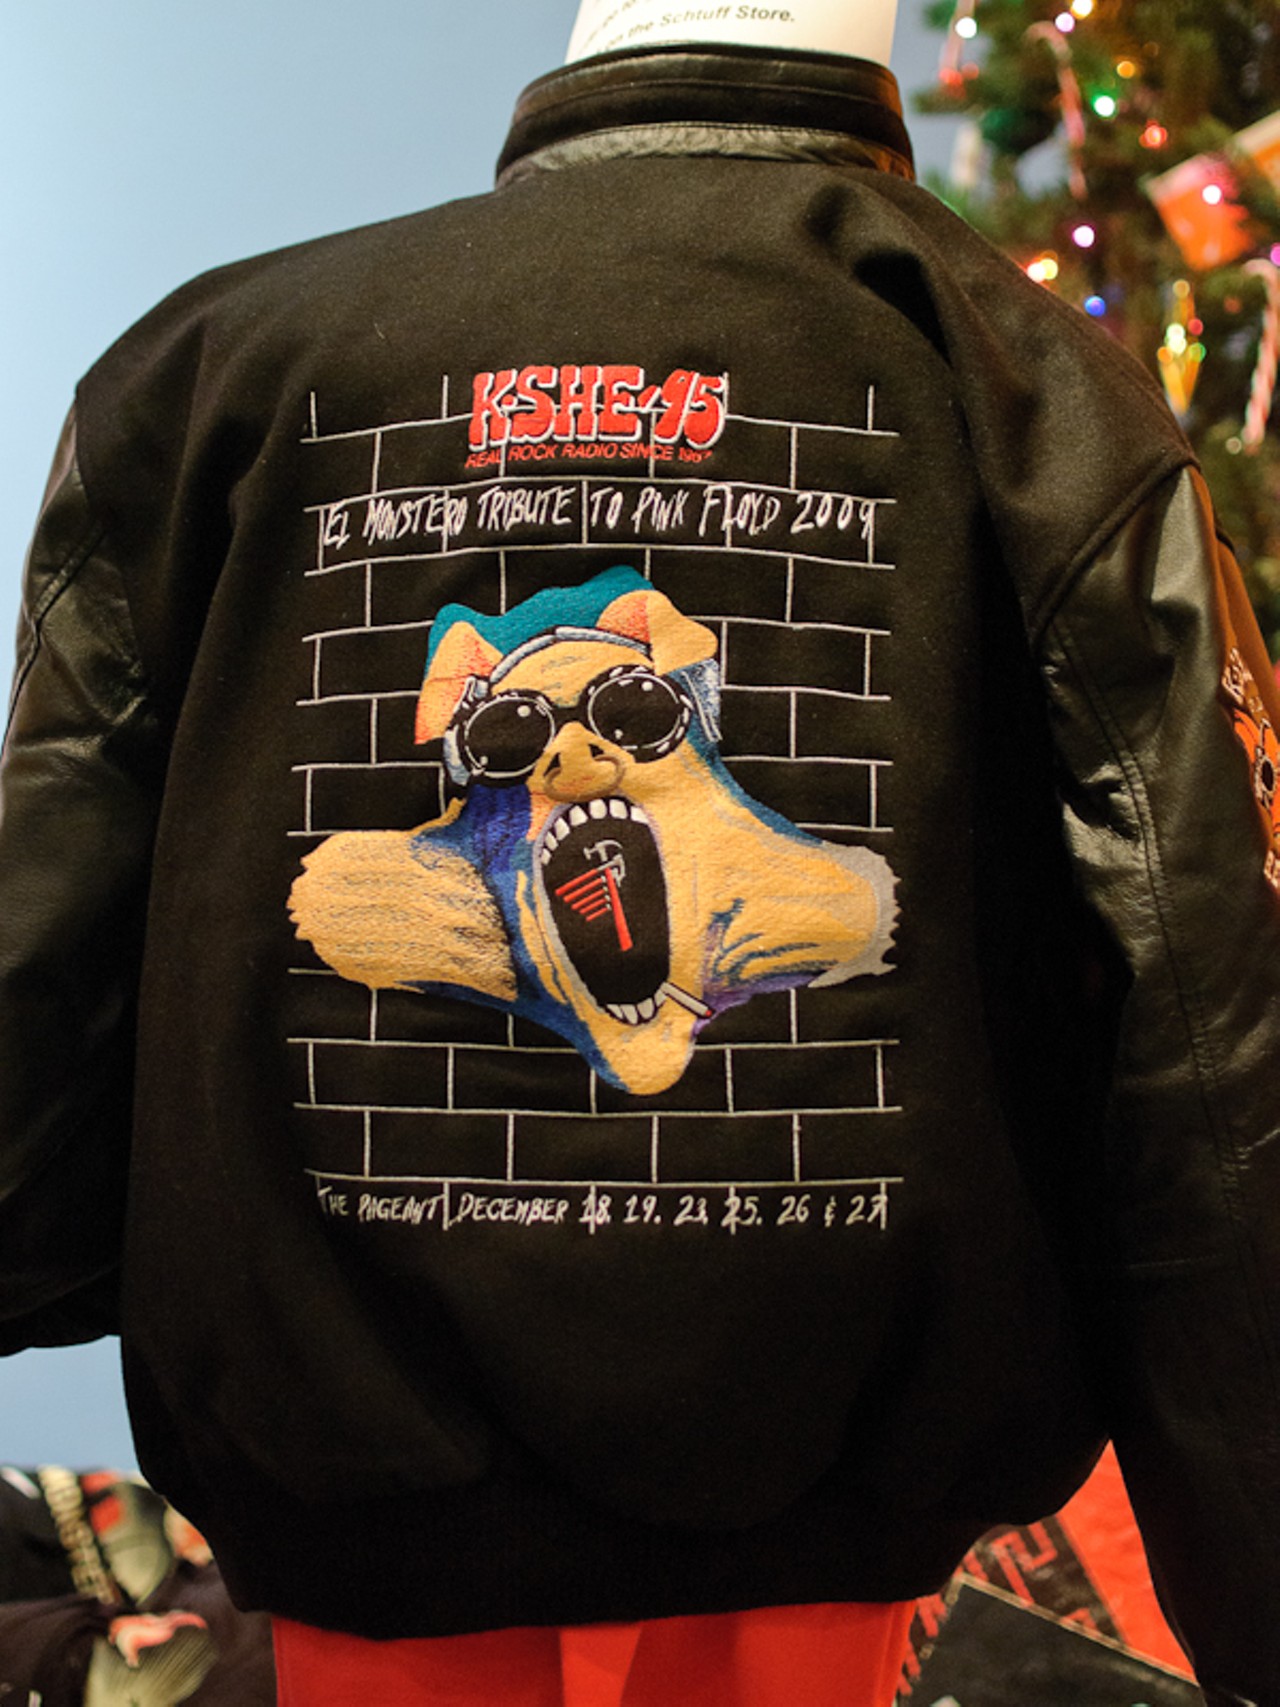 KSHE-95, a major supporter of El Monstero, had jackets for sale at the merch table in Suite 100.